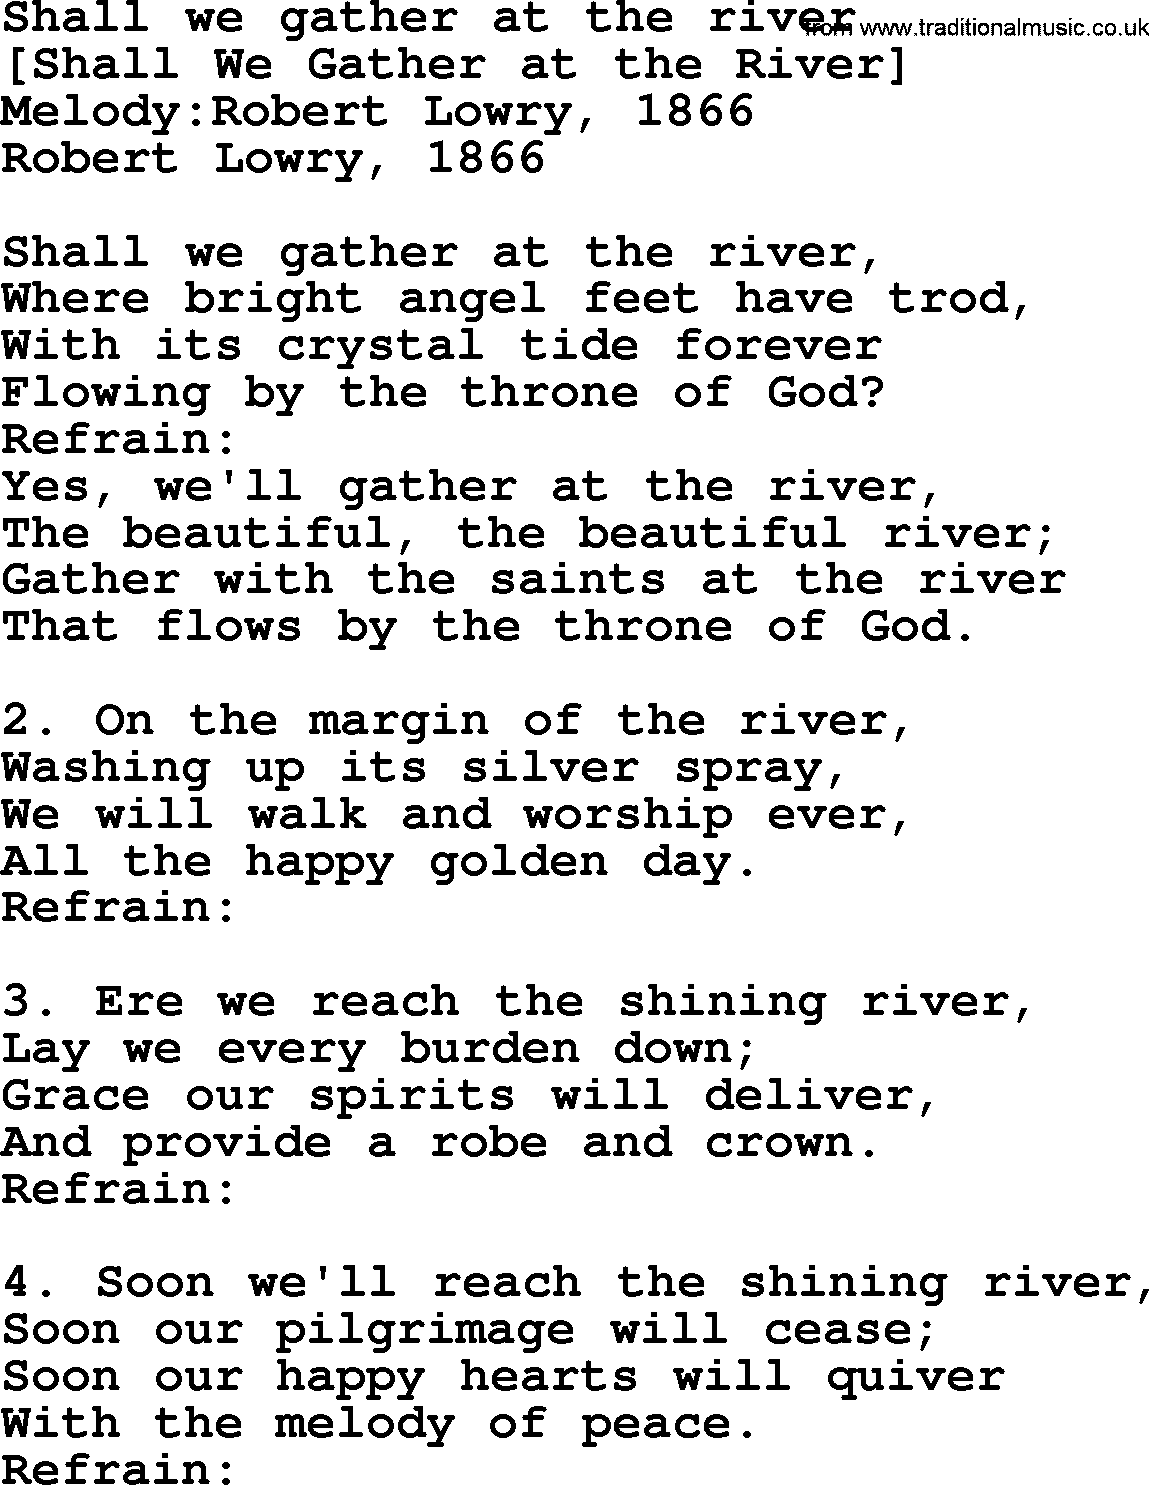 Old American Song: Shall We Gather At The River, lyrics